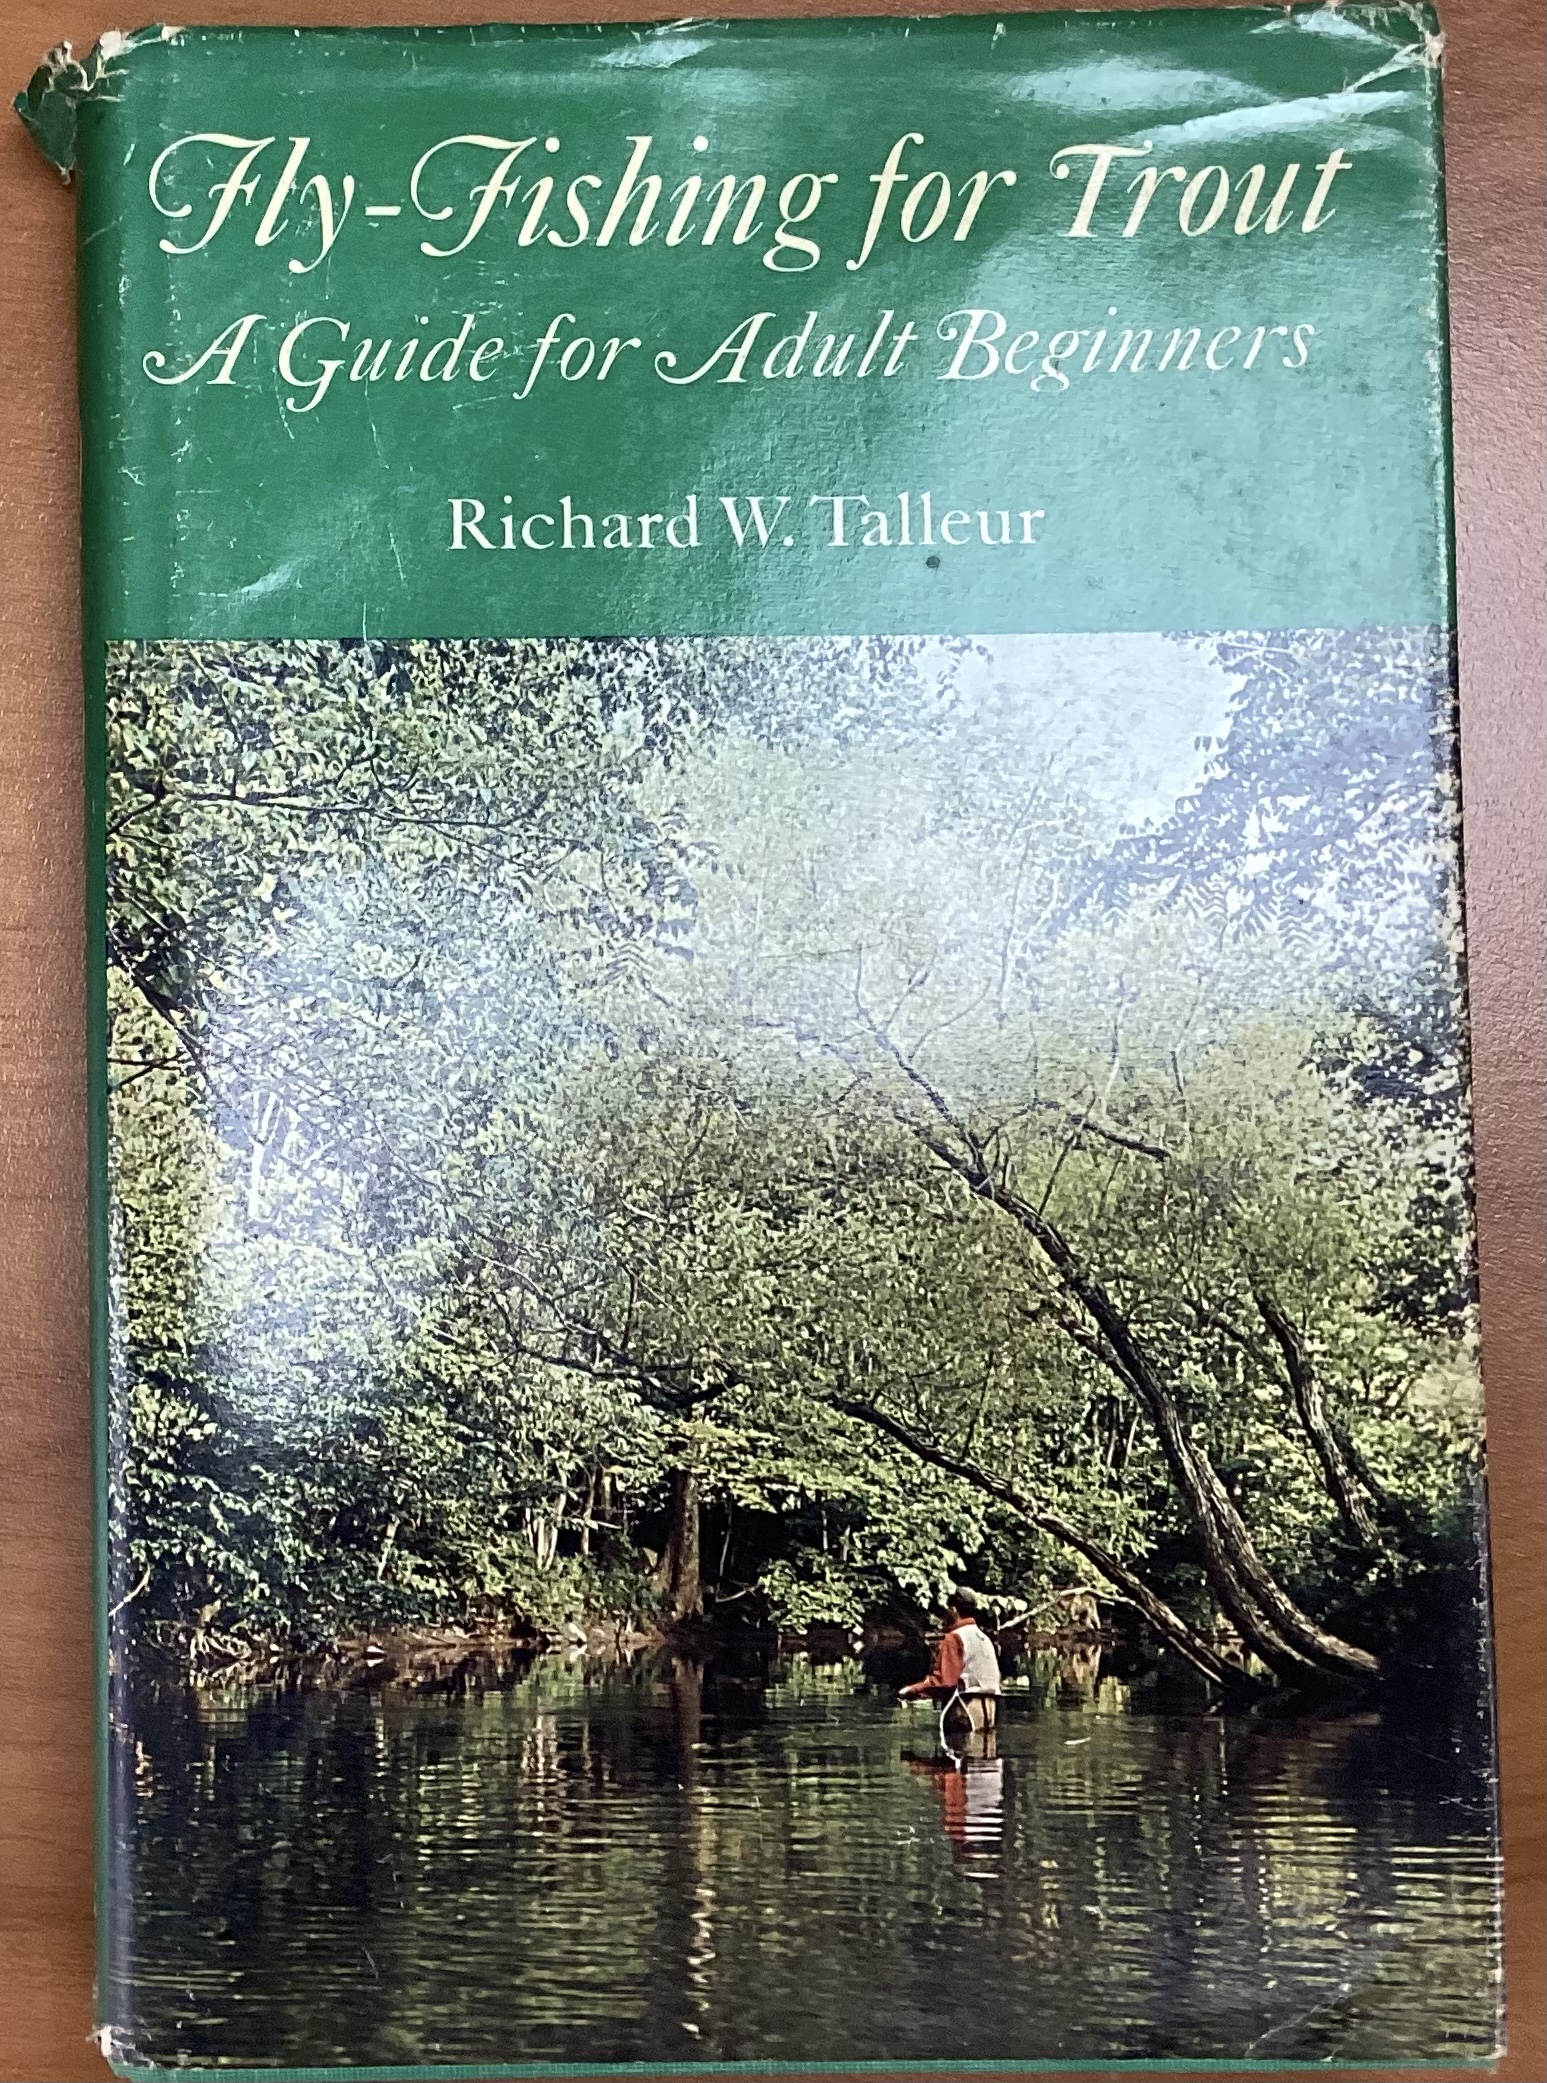 Fly Fishing for Trout a Guide for Adult Beginners; Richard W. Talleur  SIGNED - Selene's Fly Shop